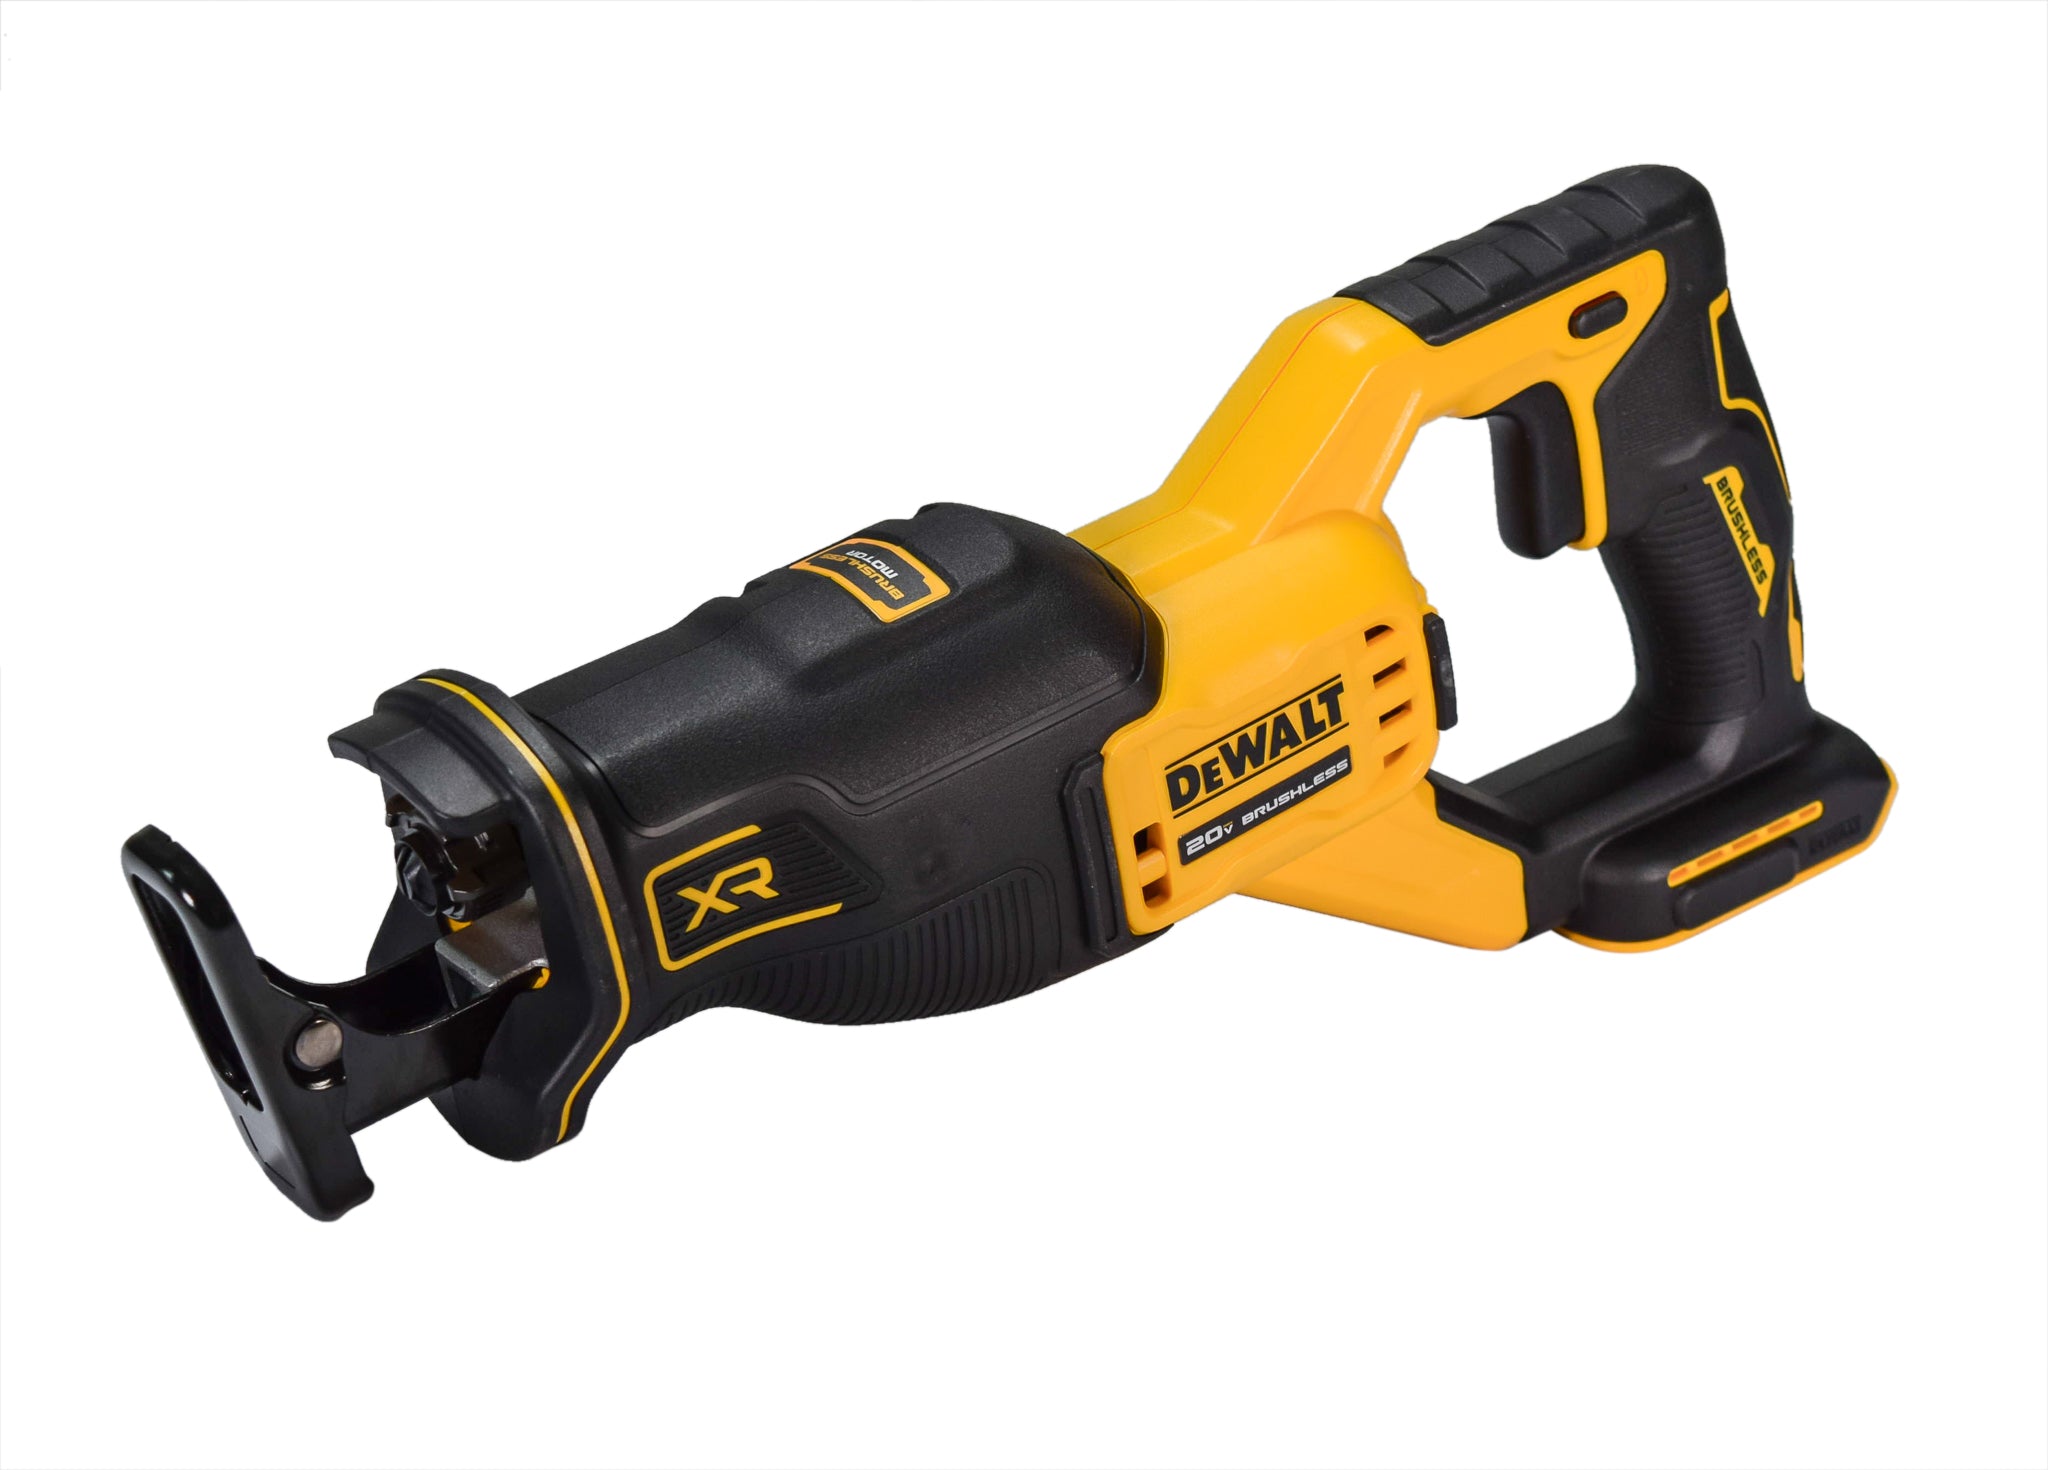 Dewalt-DCS382B-20-Volt-MAX-Cordless-Brushless-Reciprocating-Saw-Tool-Only-image-2